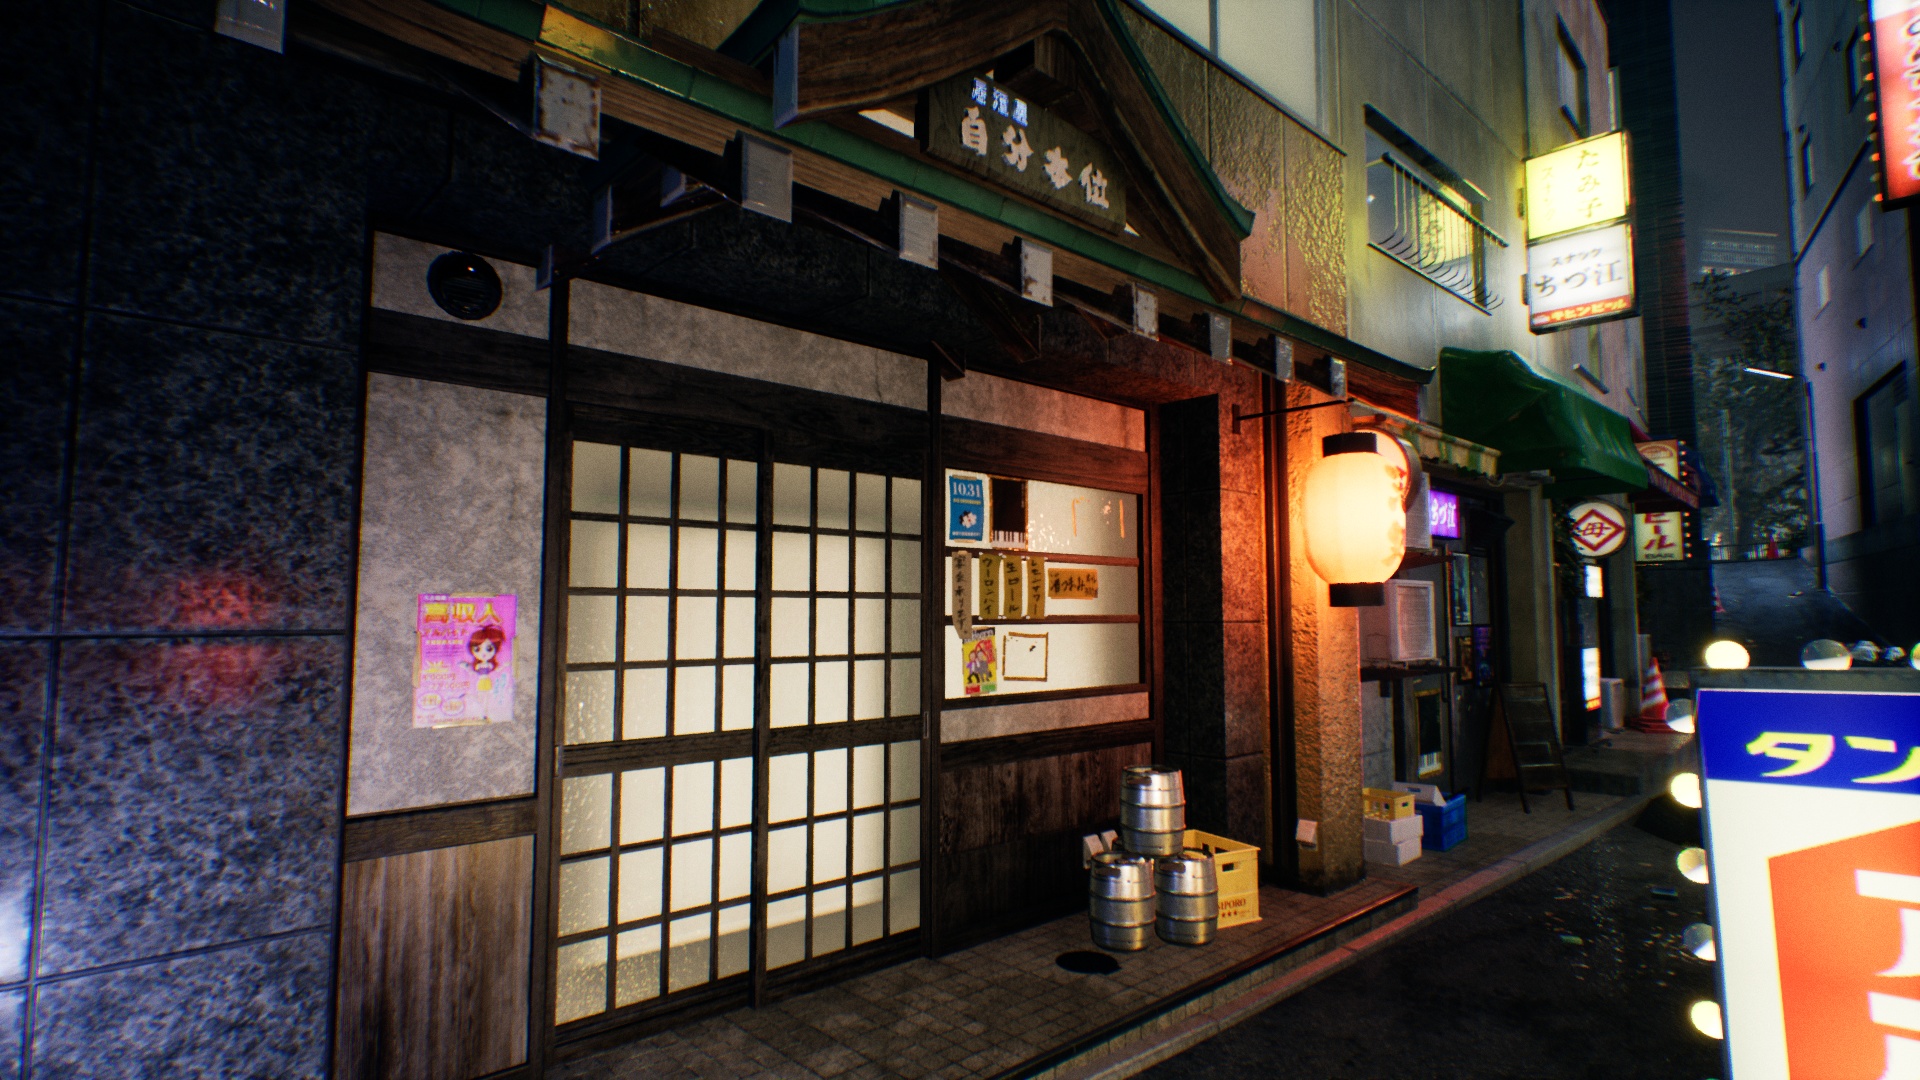 In narrow alleys we also find these typical small traditional diners, for which there is the series Midnight Diner: Tokyo Stories on Netfix